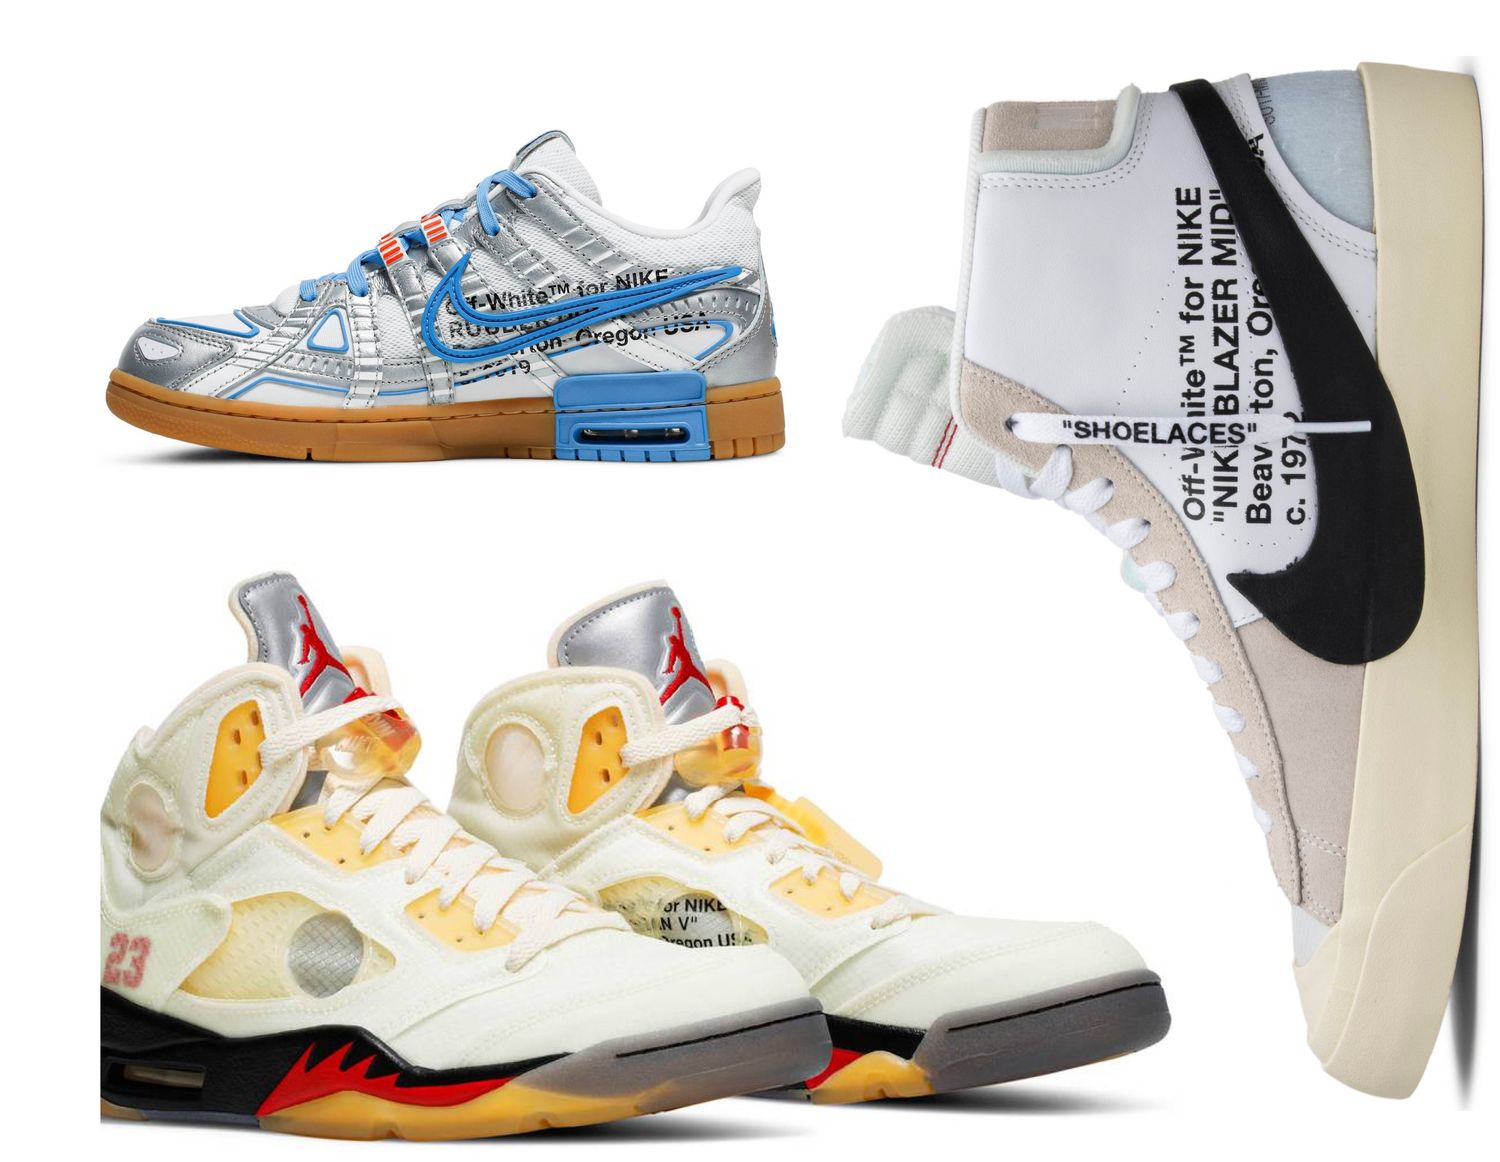 Virgil Abloh's 5 Most Iconic Sneaker Designs